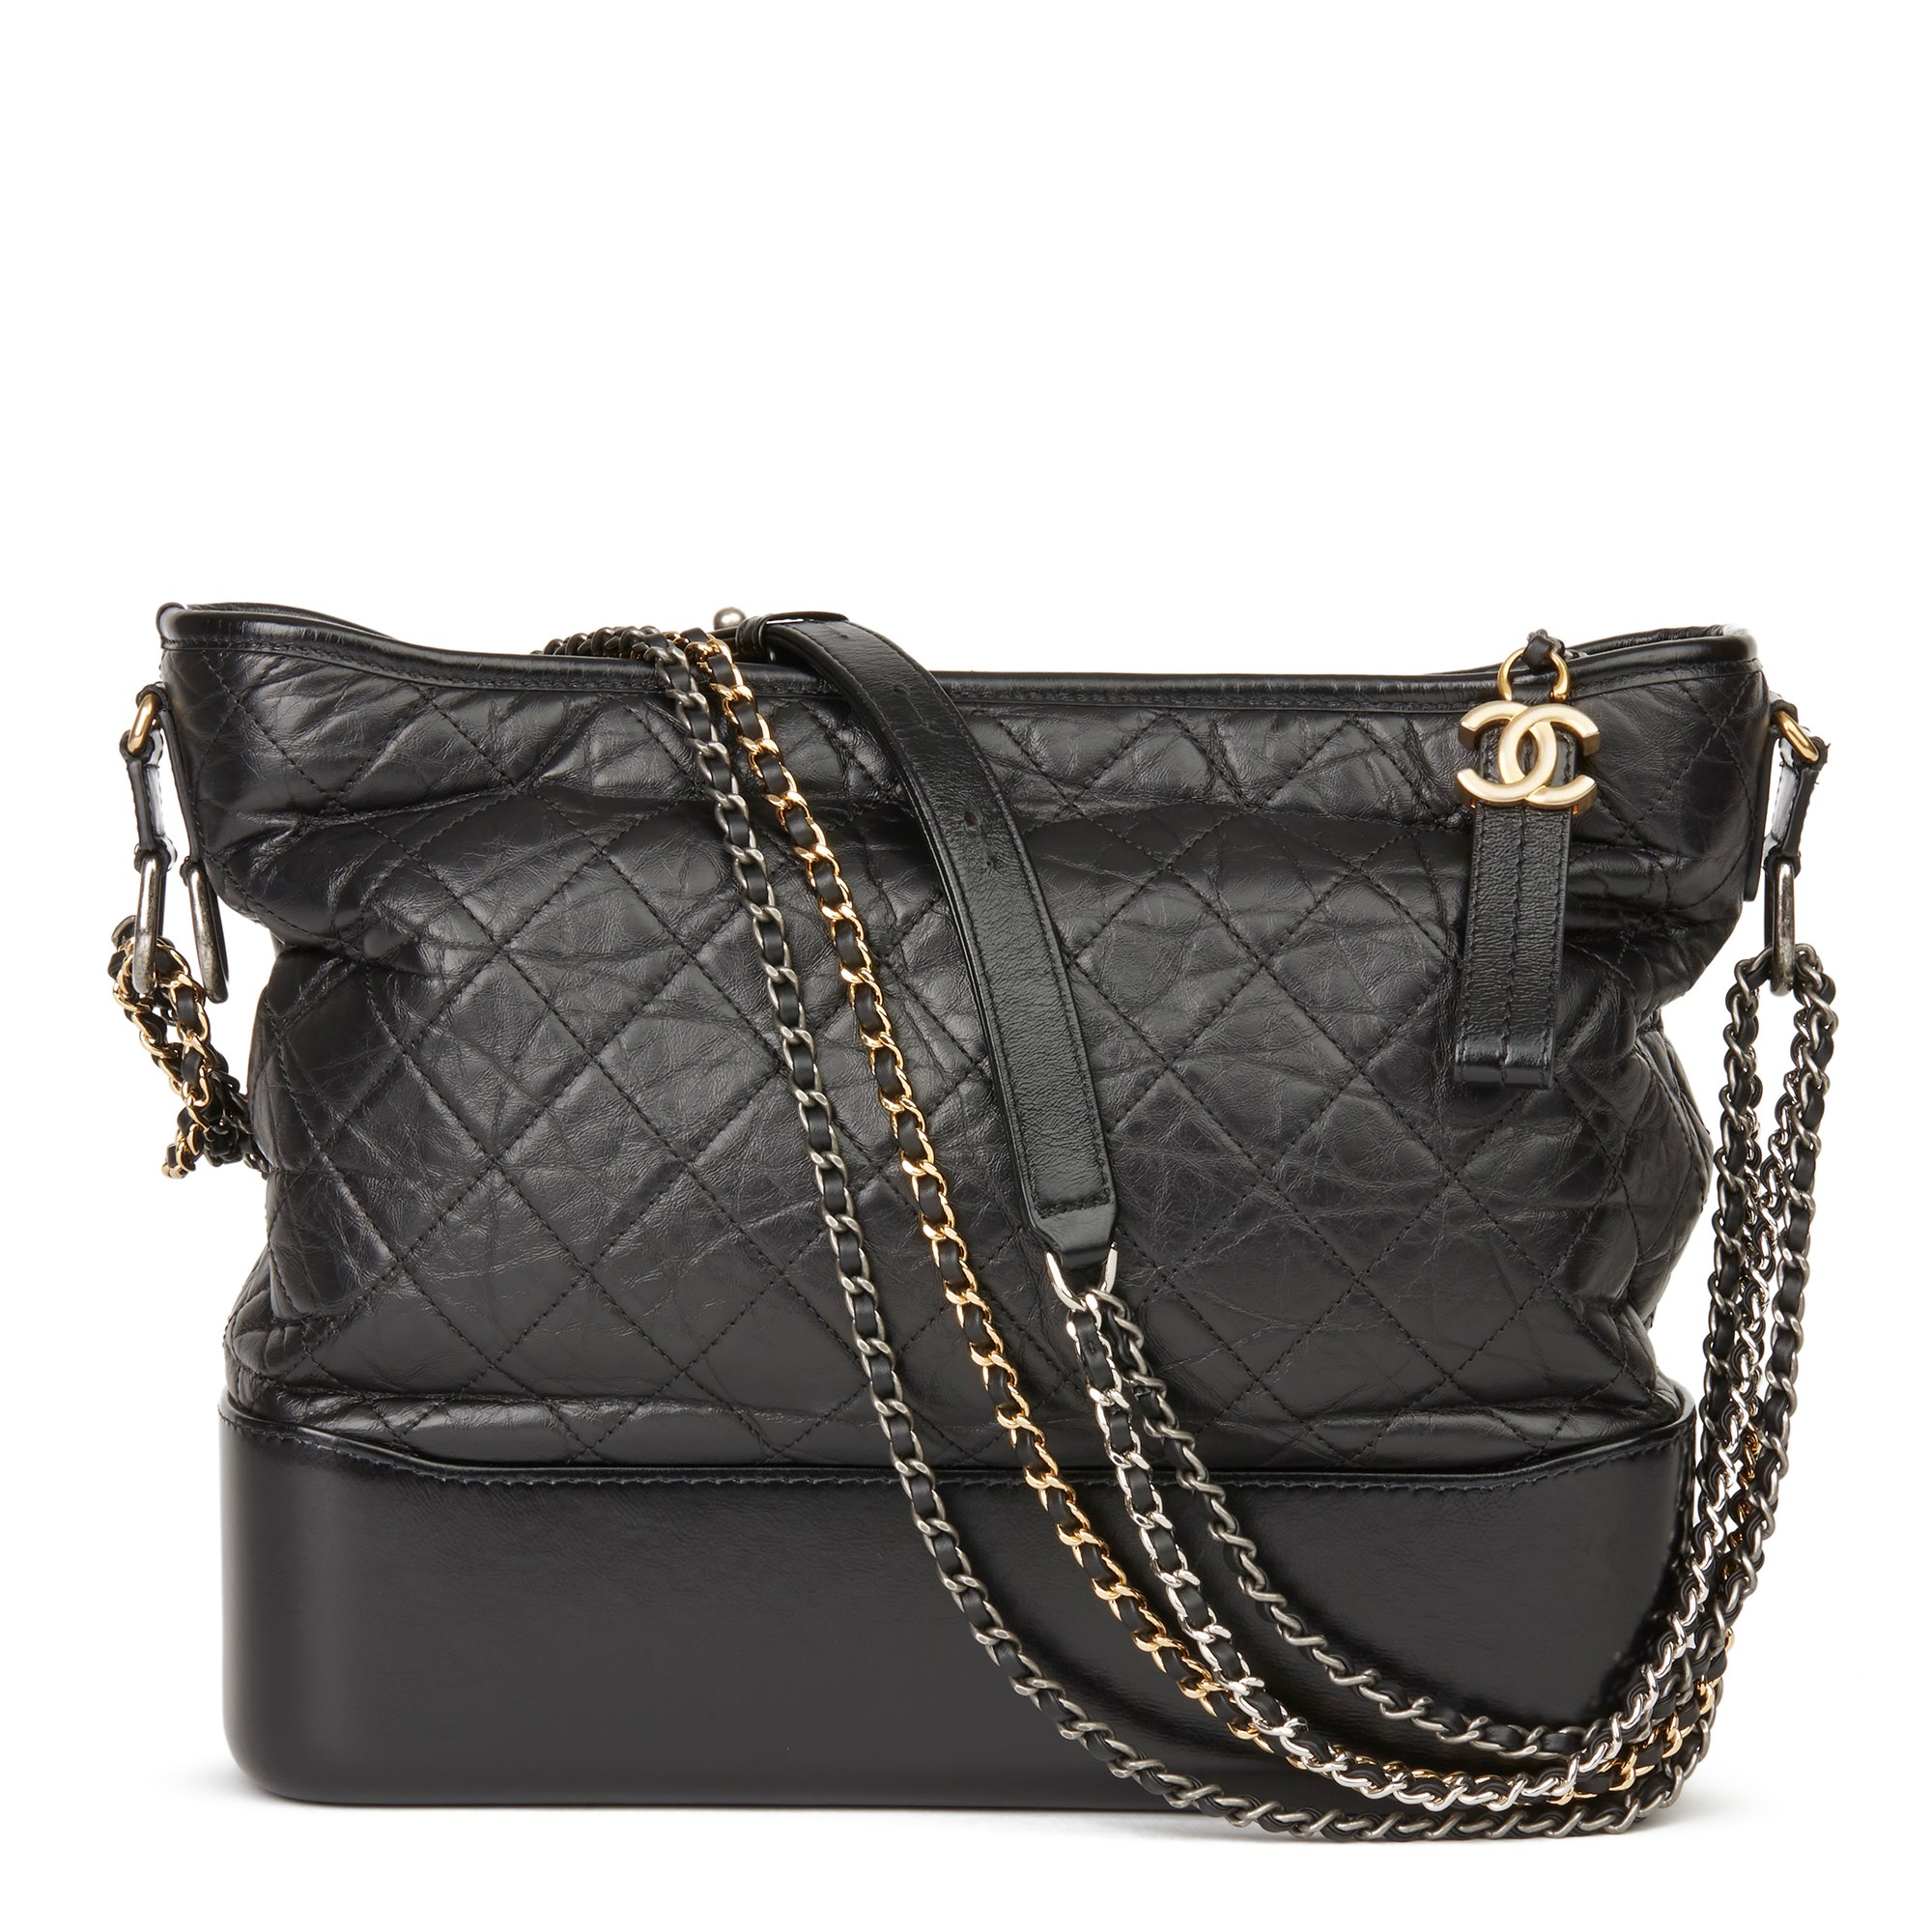 Buy,chanel gabrielle hobo bag price,Exclusive Deals and Offers,admin ...